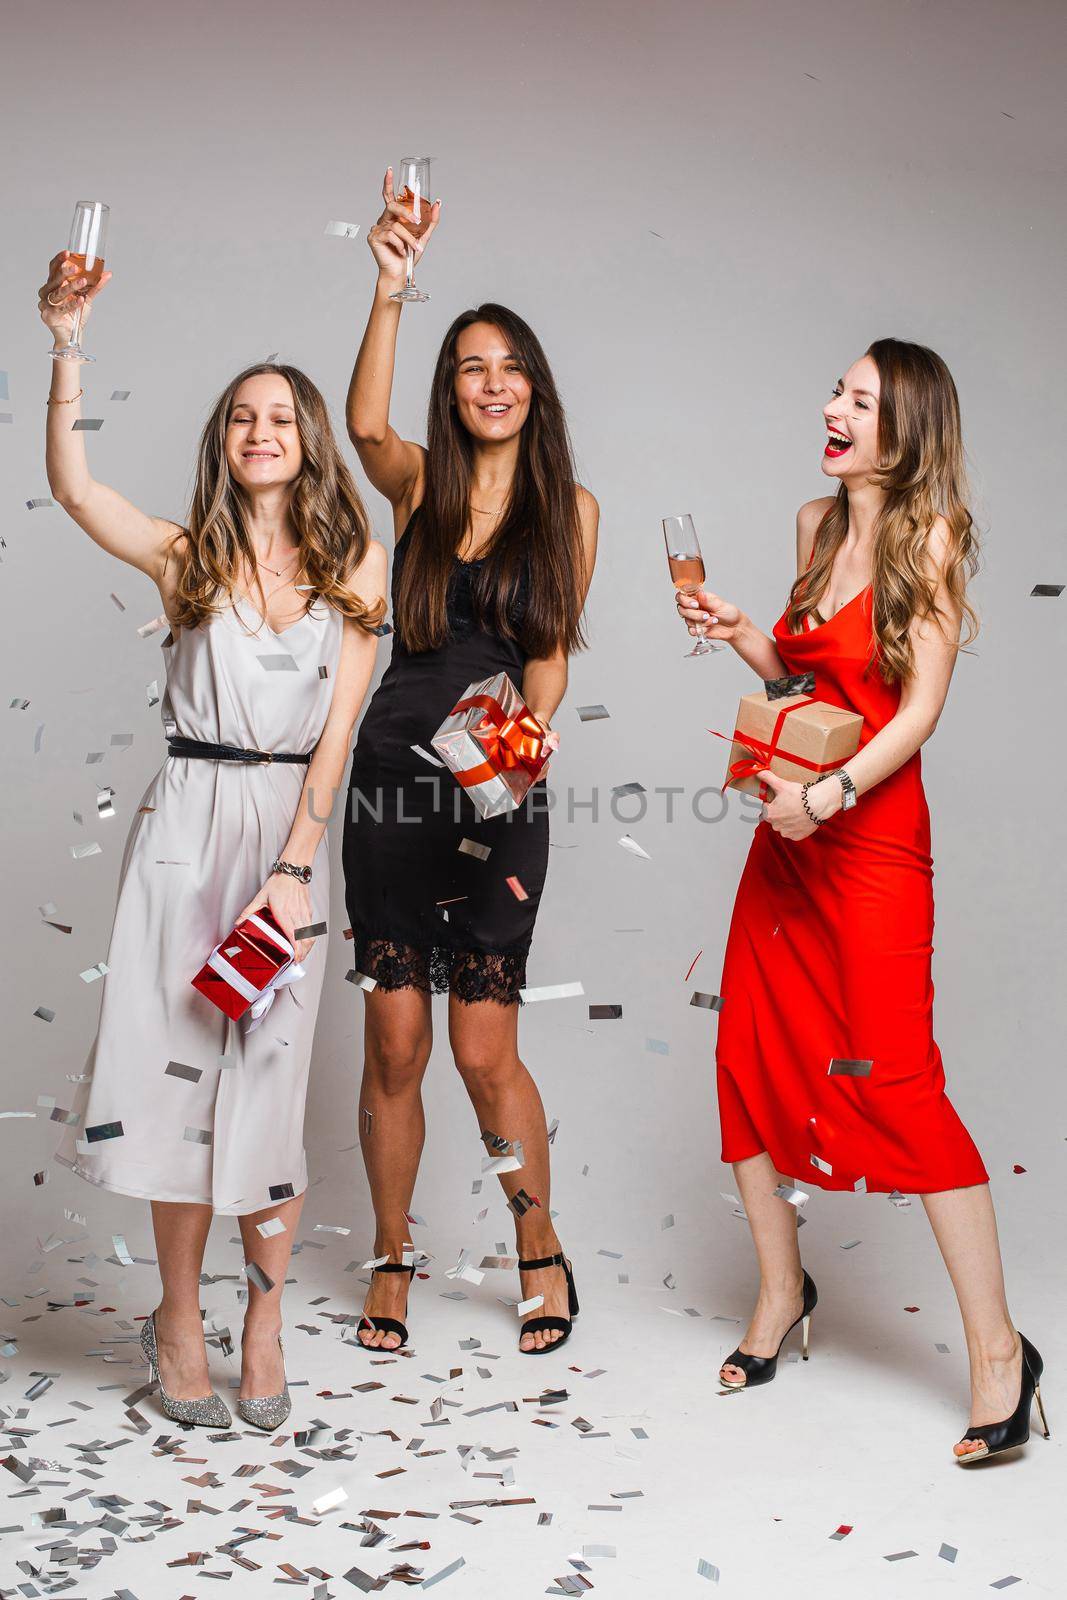 Portrait of jovial carefree beautiful ladies in cocktail dresses with glasses of alcoholic drinks dancing and having fun under falling silver confetti. Girls with drinks holding wrapped gifts.